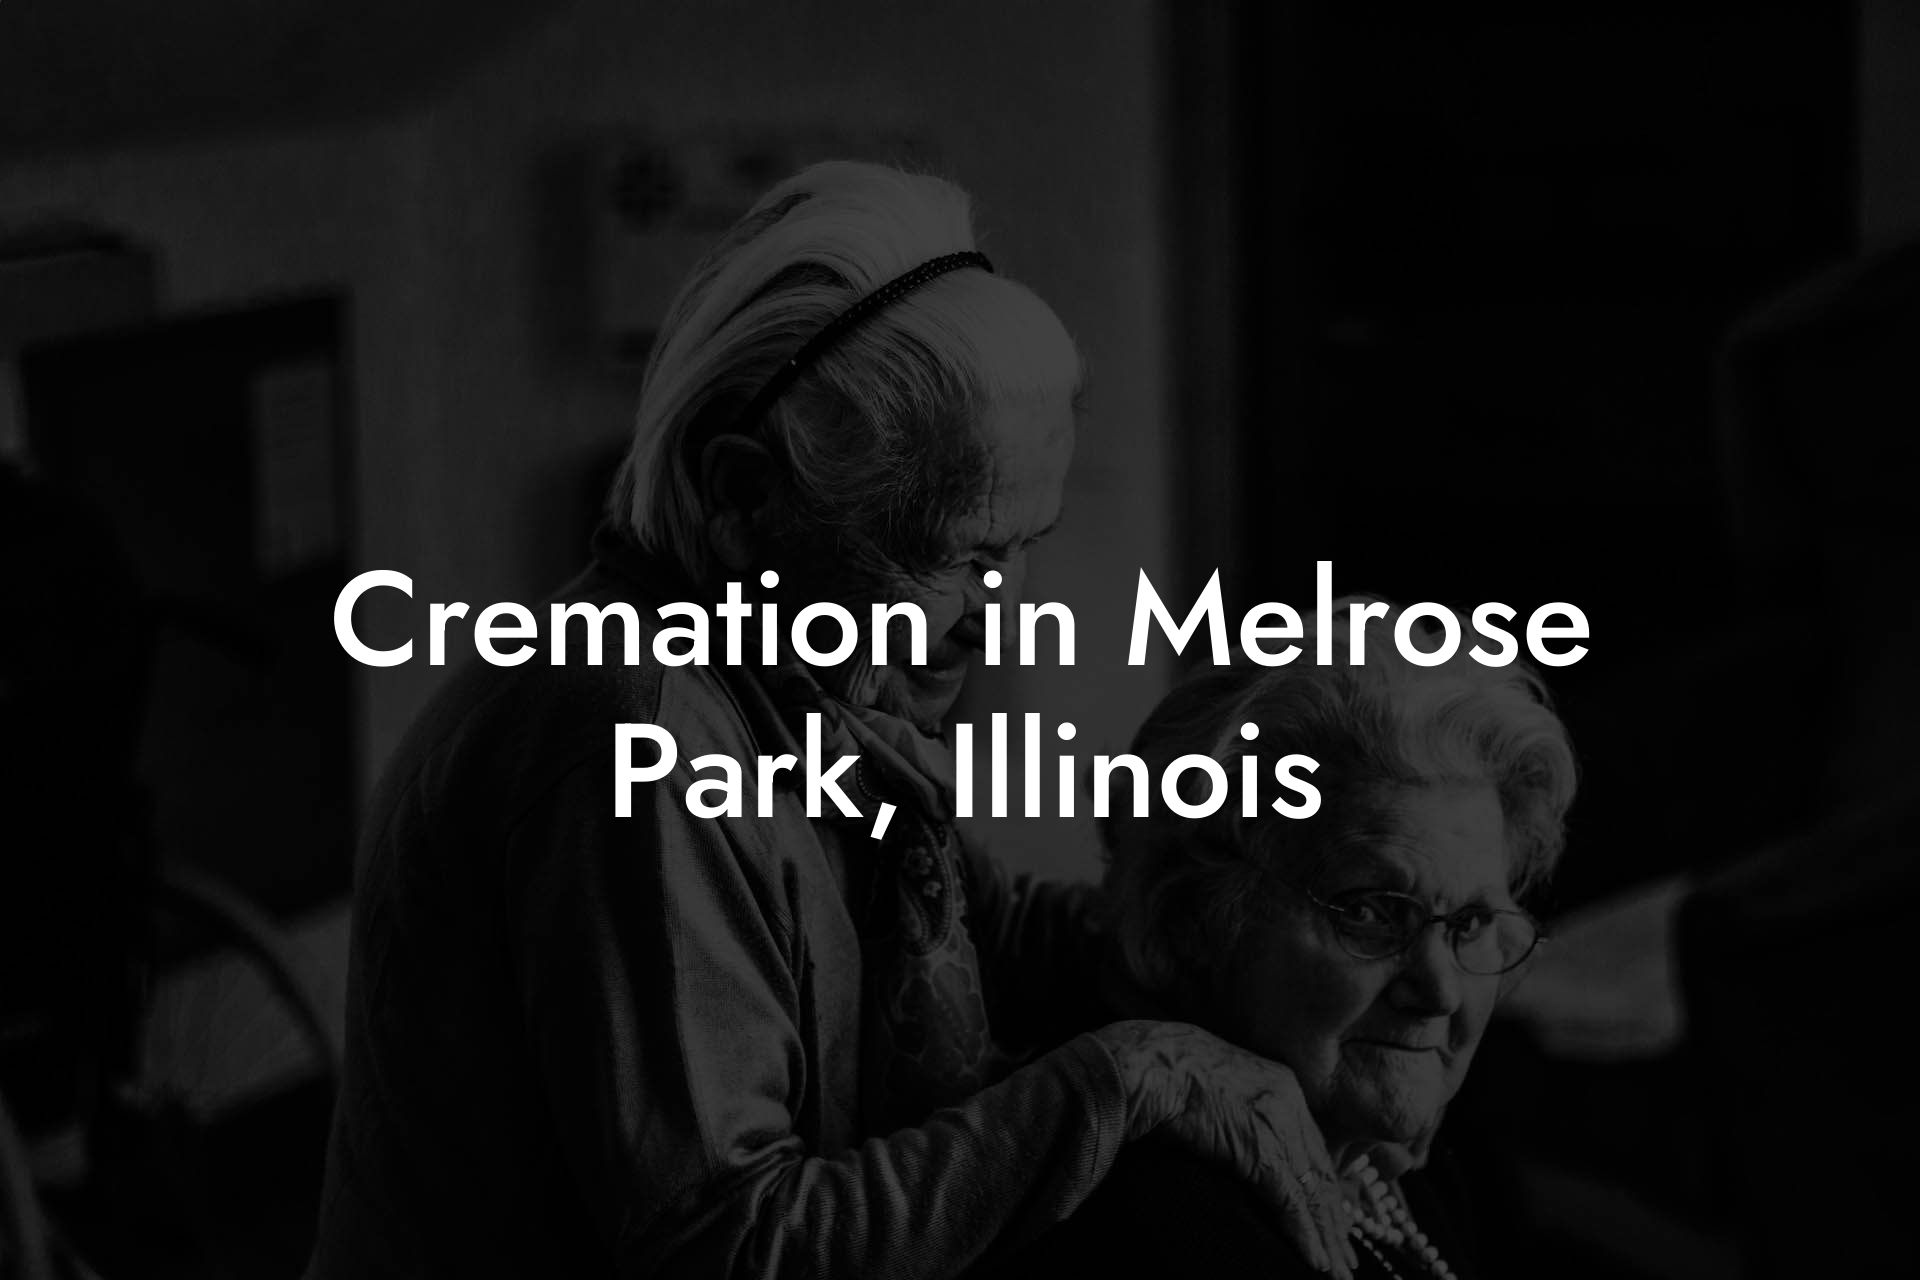 Cremation in Melrose Park, Illinois